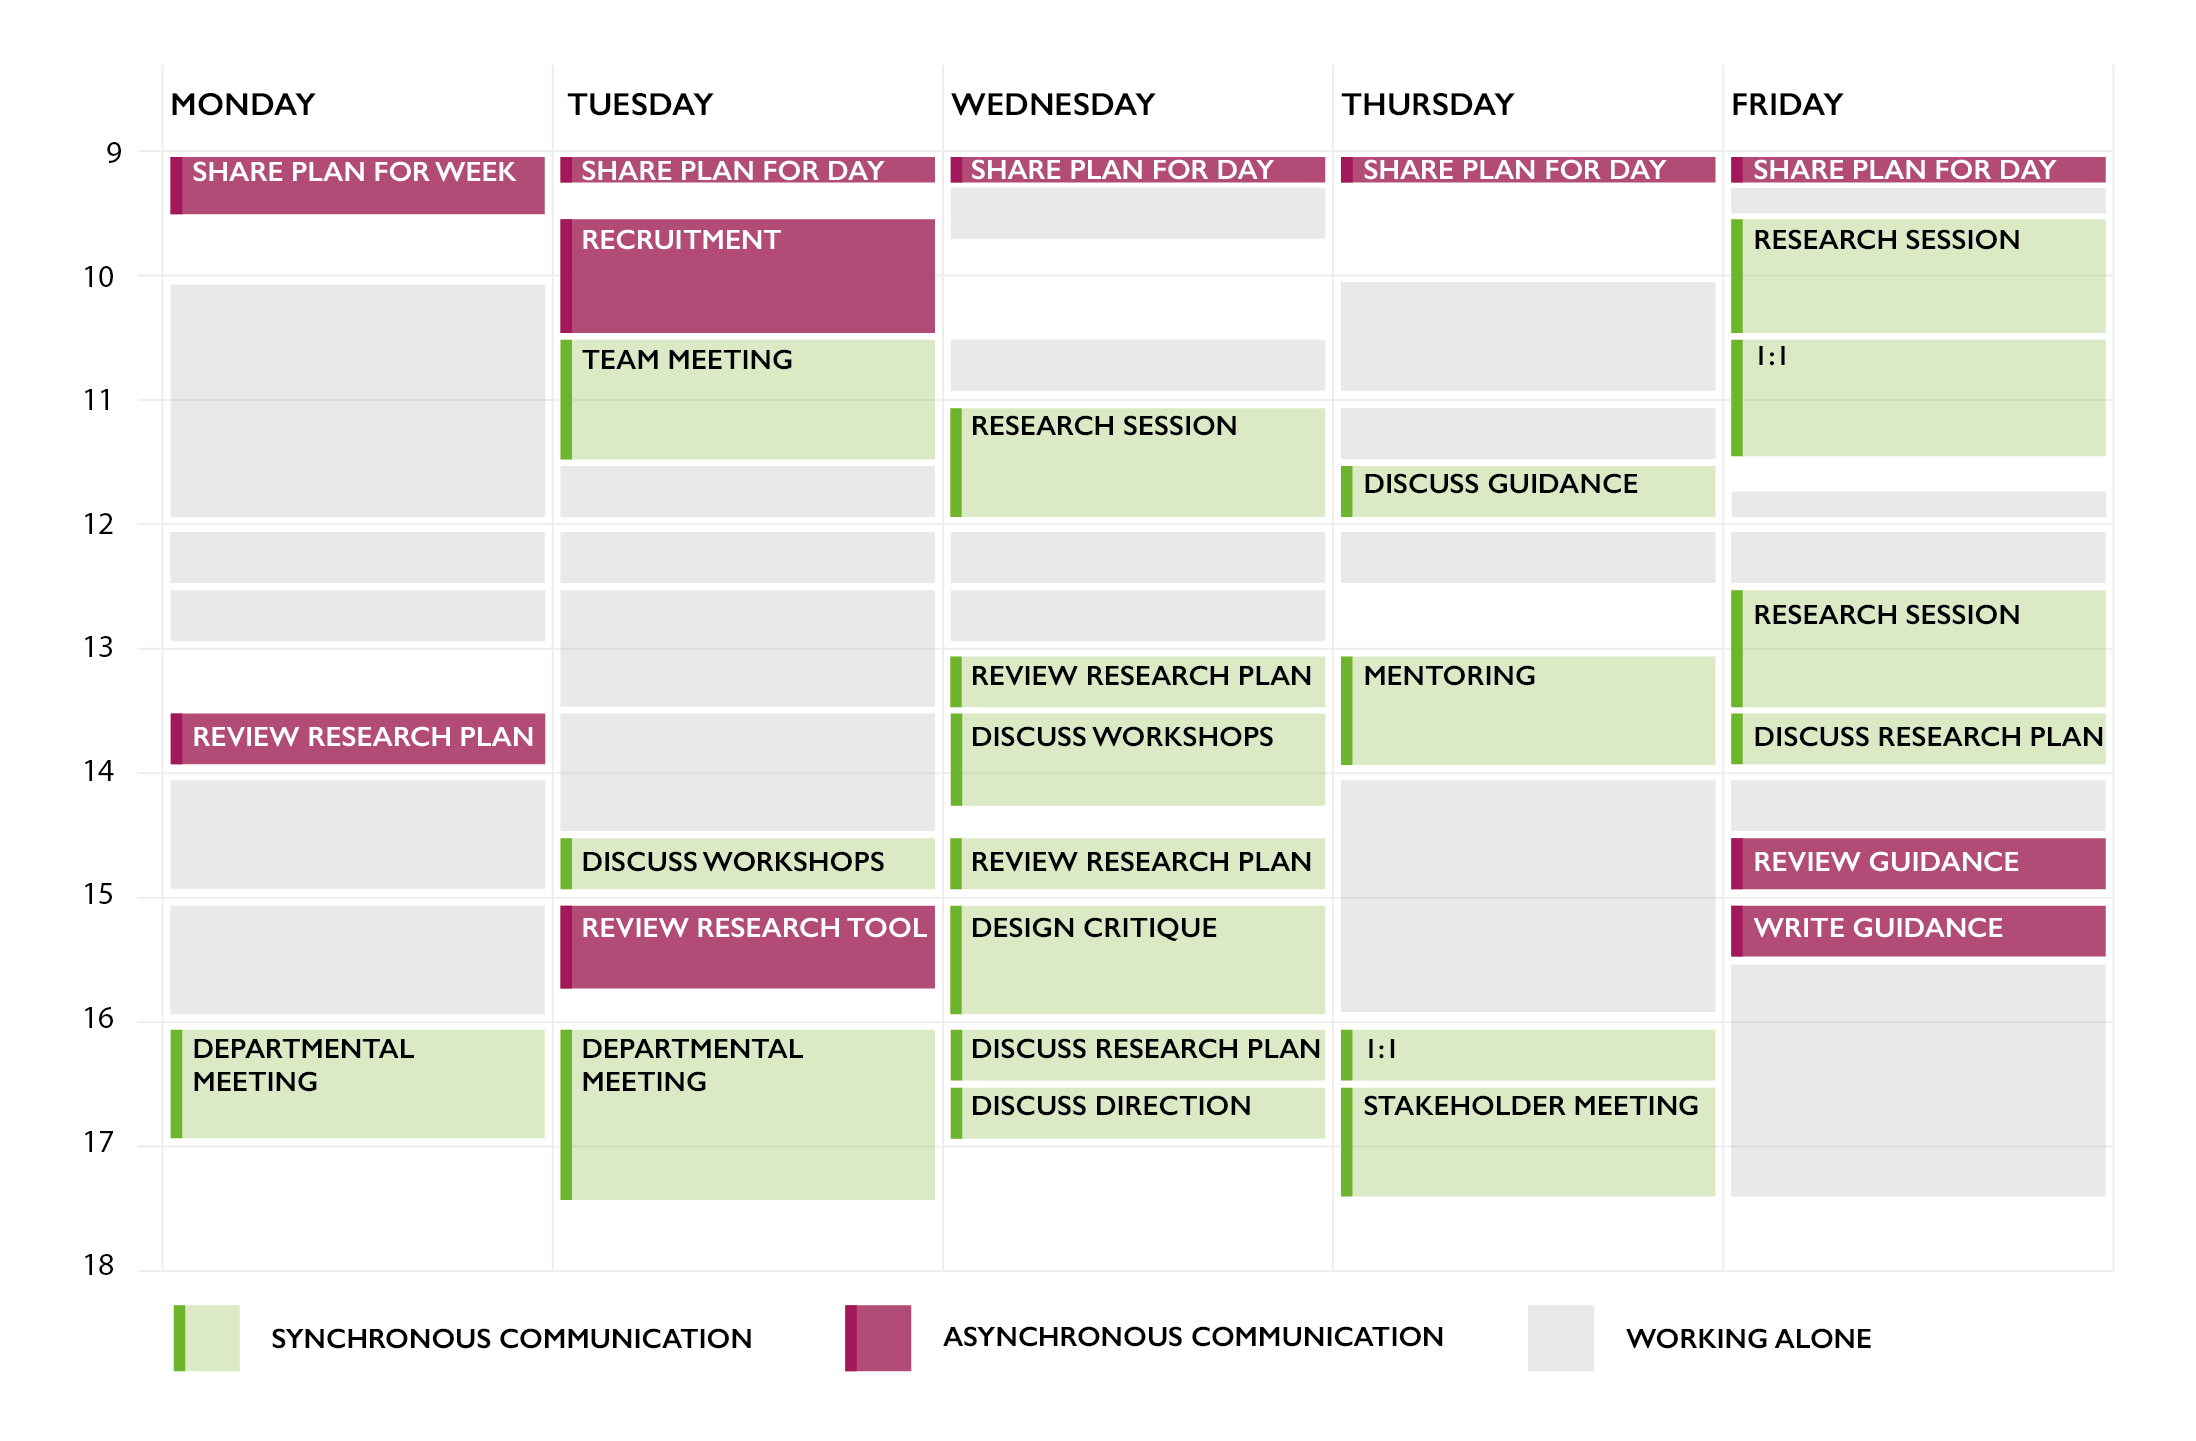 Week overview showing breakdown of activities containing synchronous communication, asynchronous communication, and no communication (working alone)